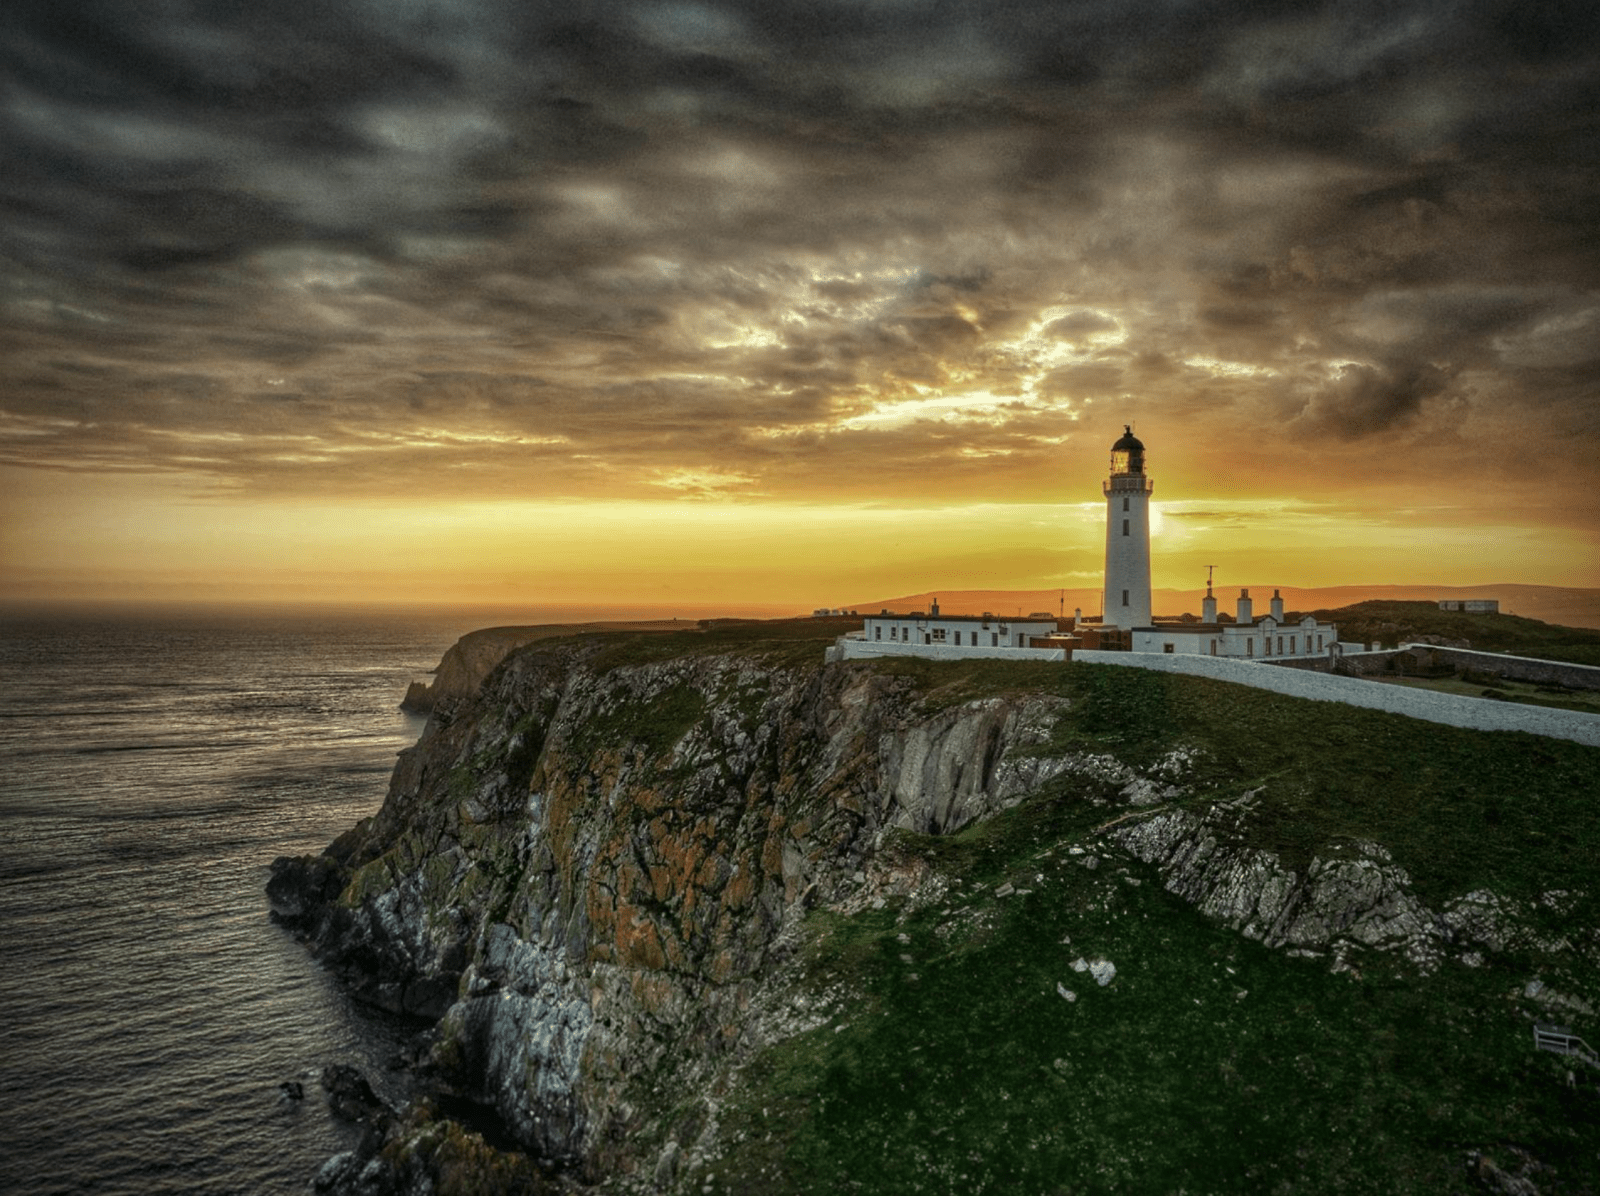 Mull Of Galloway Lighthouse Scottish Landscape Photography-Scottish Landscape Photography-Hebridean Islands Art Gallery-Paintings, Prints, Homeware, Art Gifts From Scotland By Scottish Artist Kevin Hunter